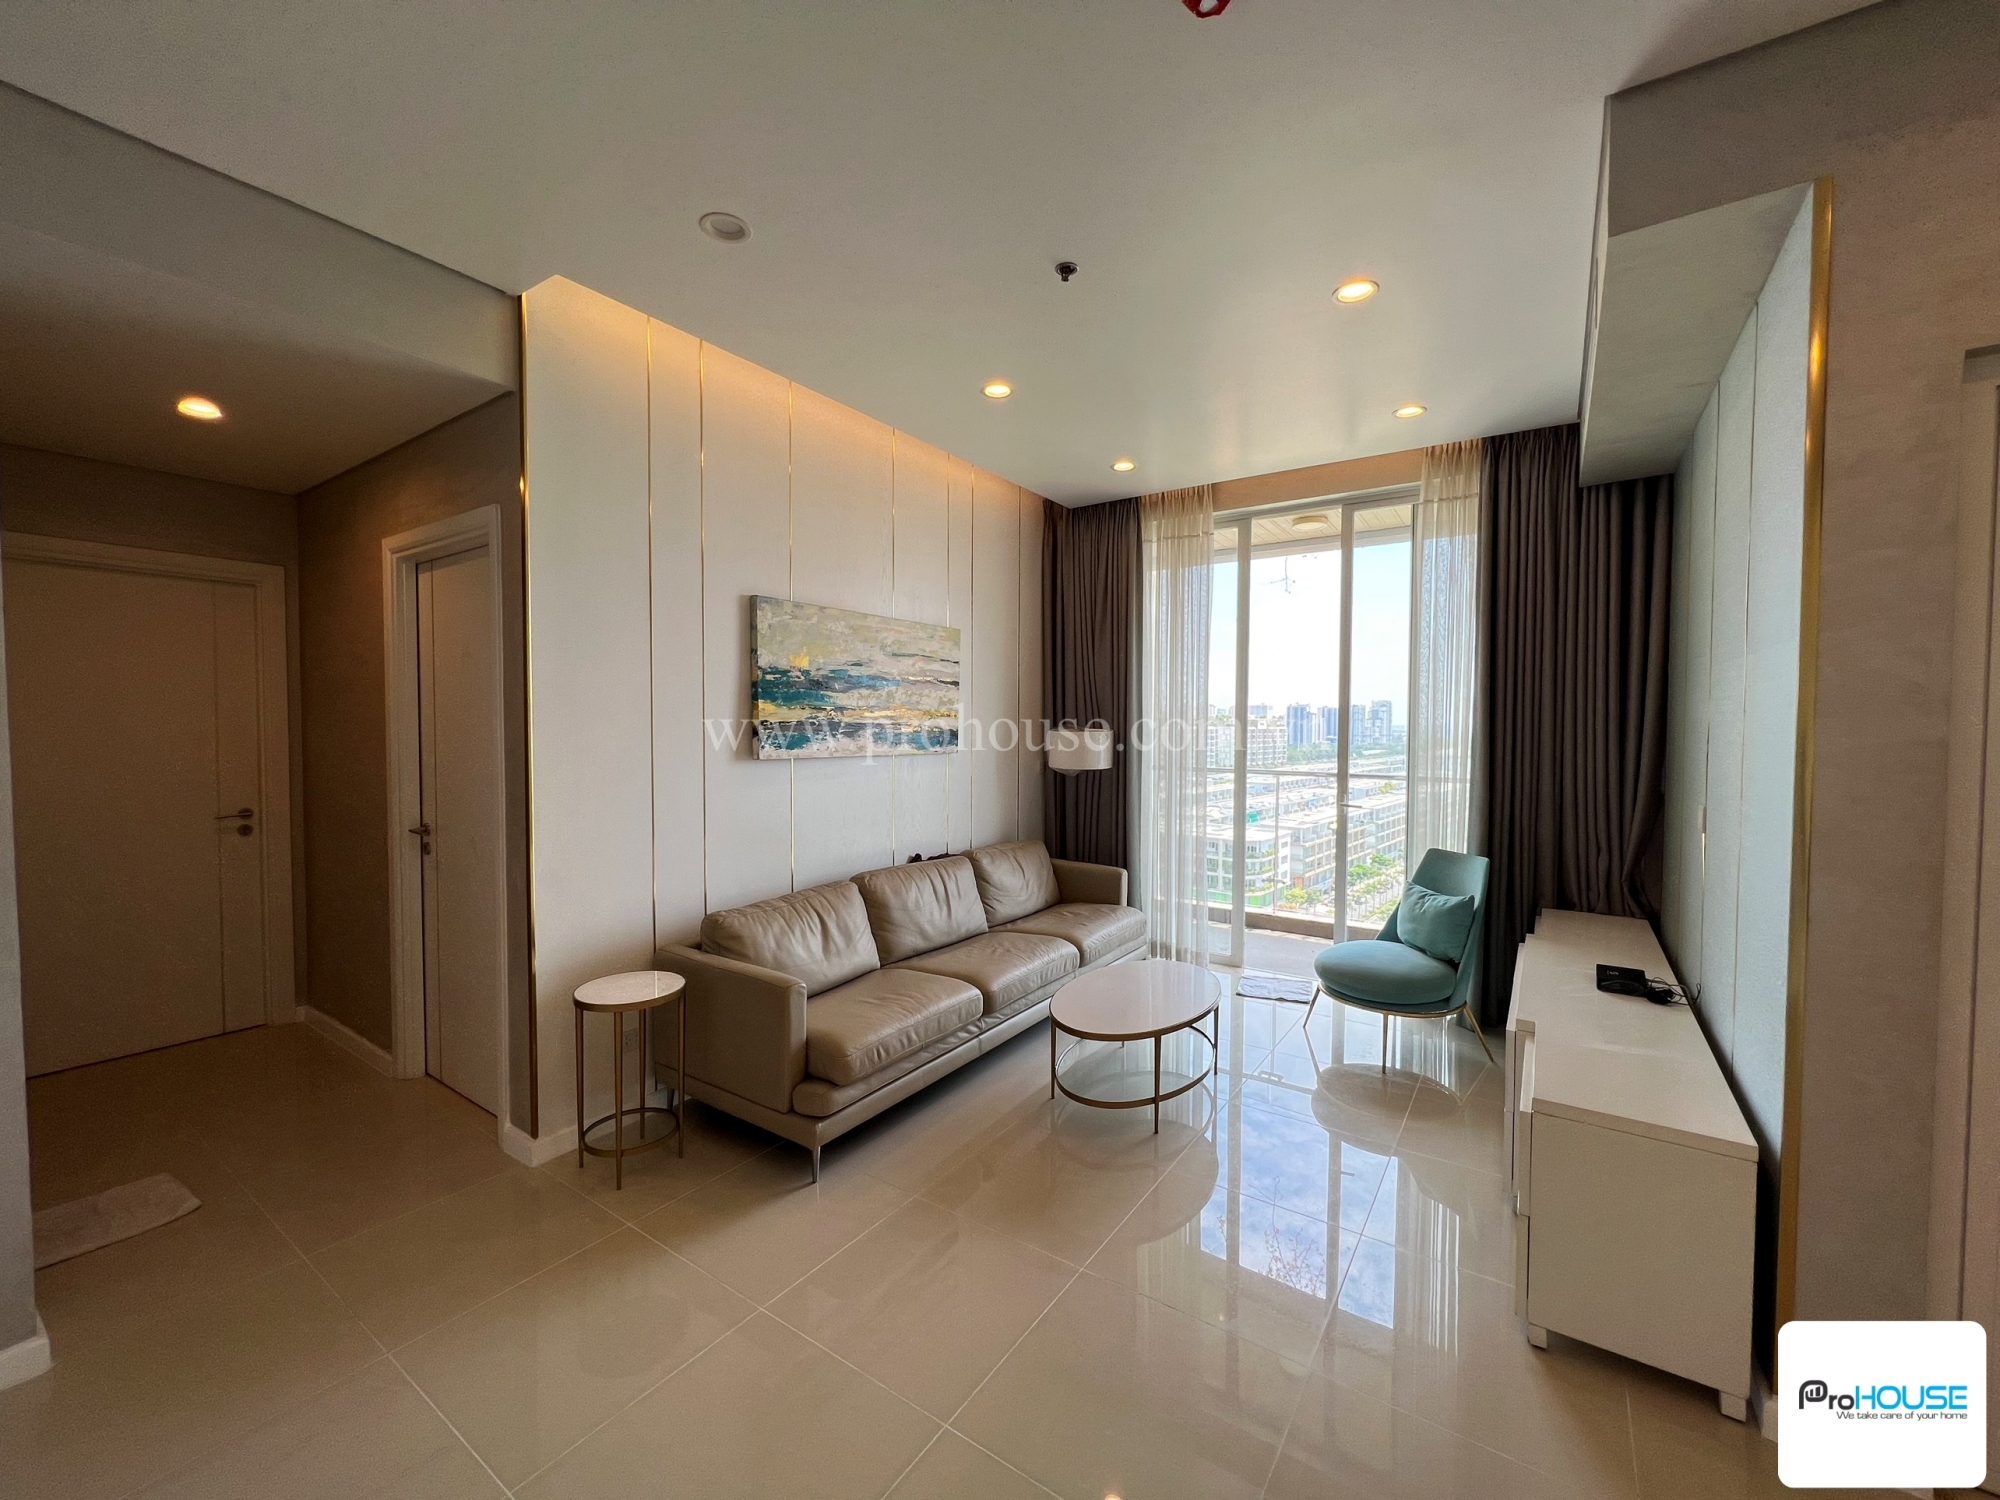 Sarimi luxury apartment with full facilities in District 2